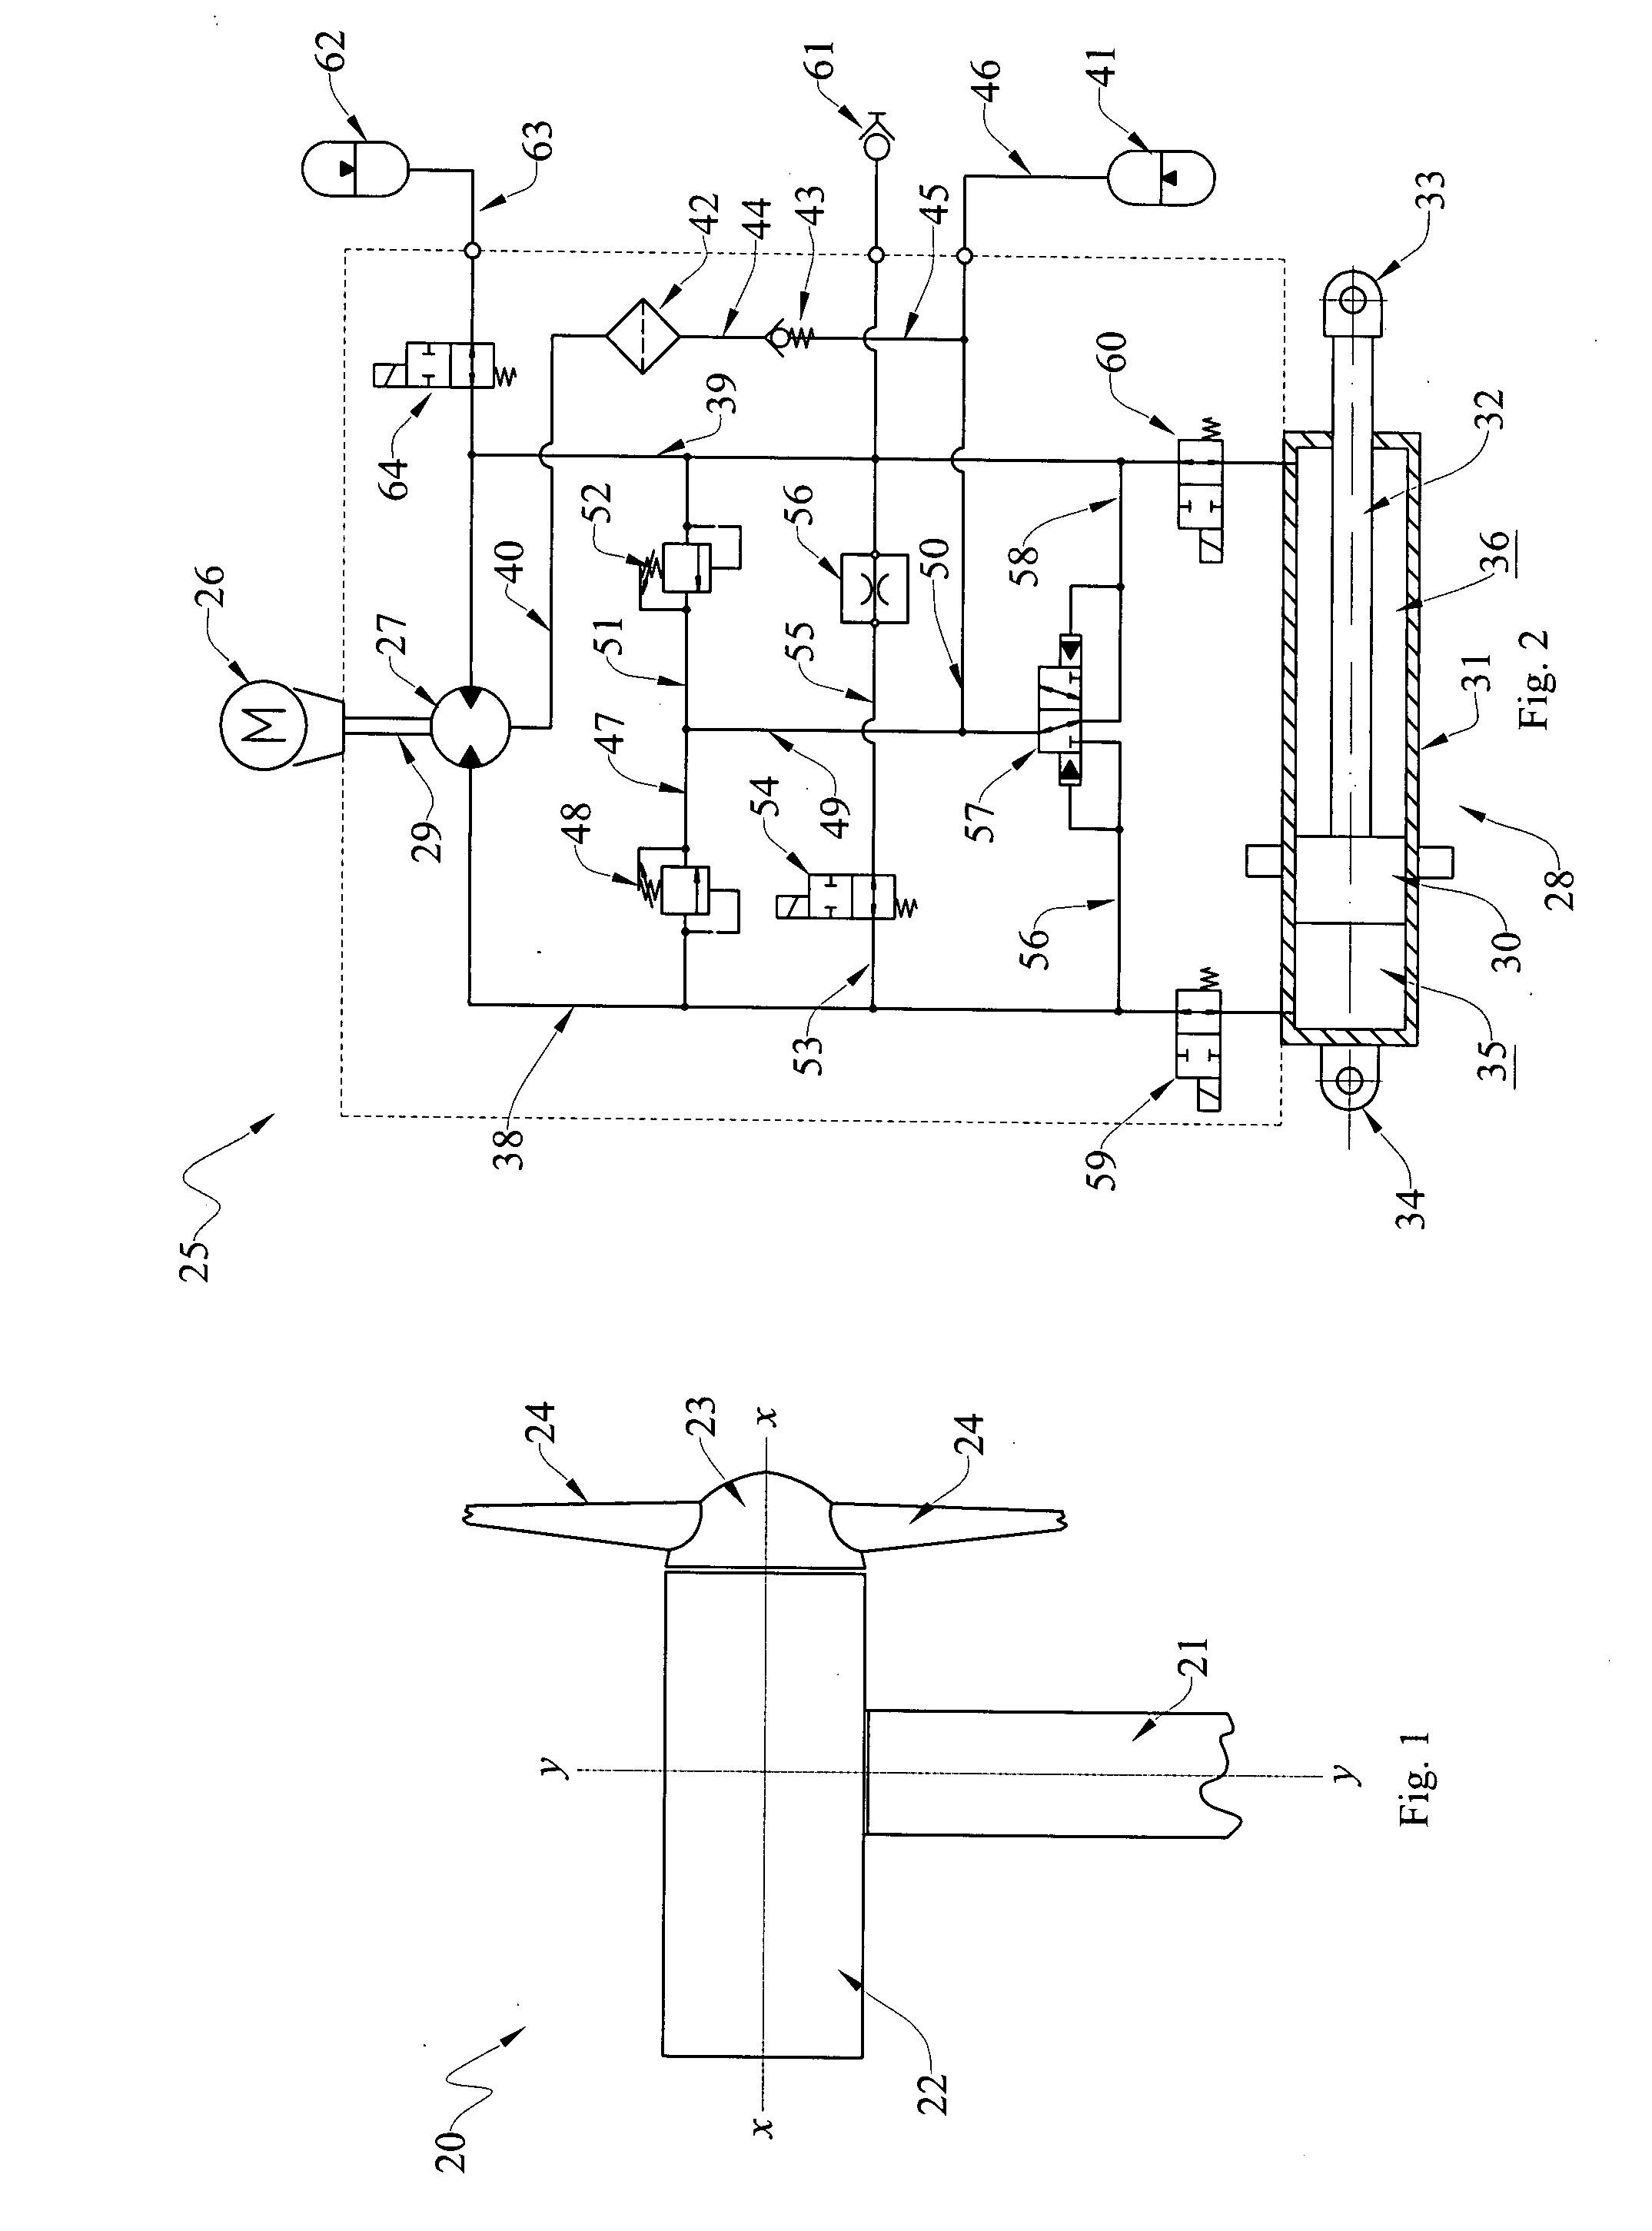 Electro-hydraulic actuator for controlling the pitch of a blade of a wind turbine